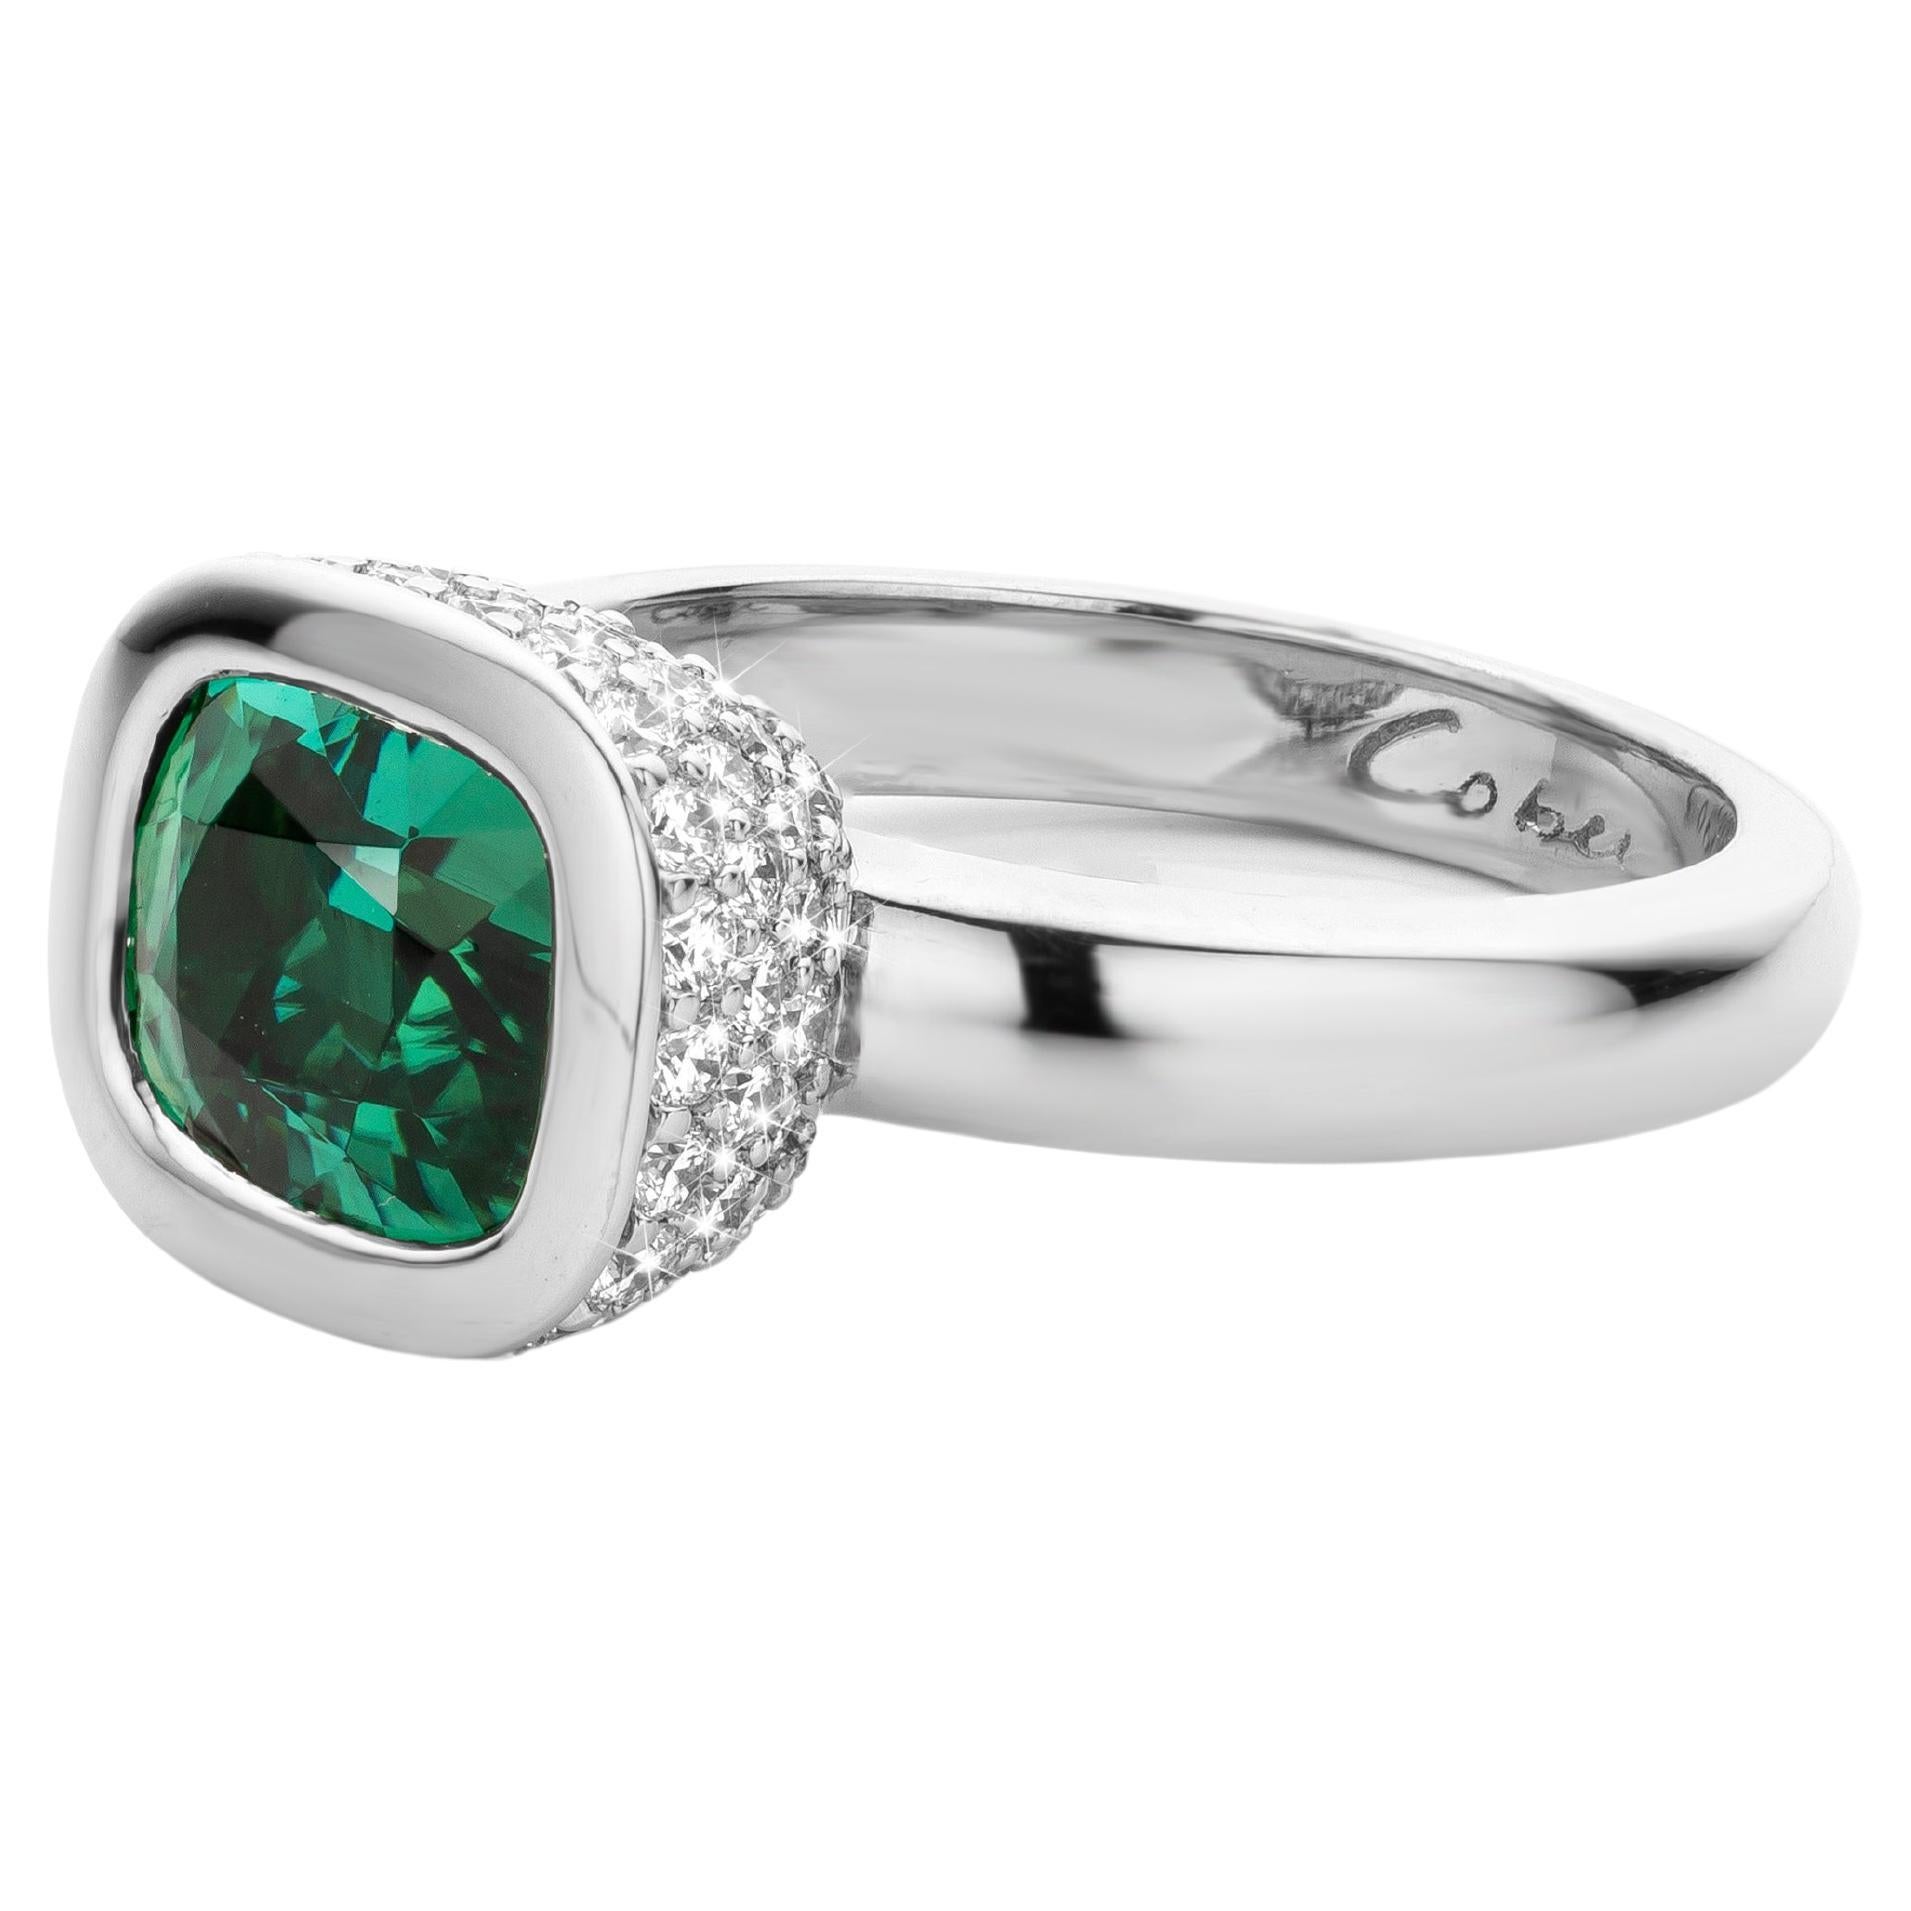 Cober “Sparkling cup”with vivid green Tourmaline and Diamonds White Gold Ring 